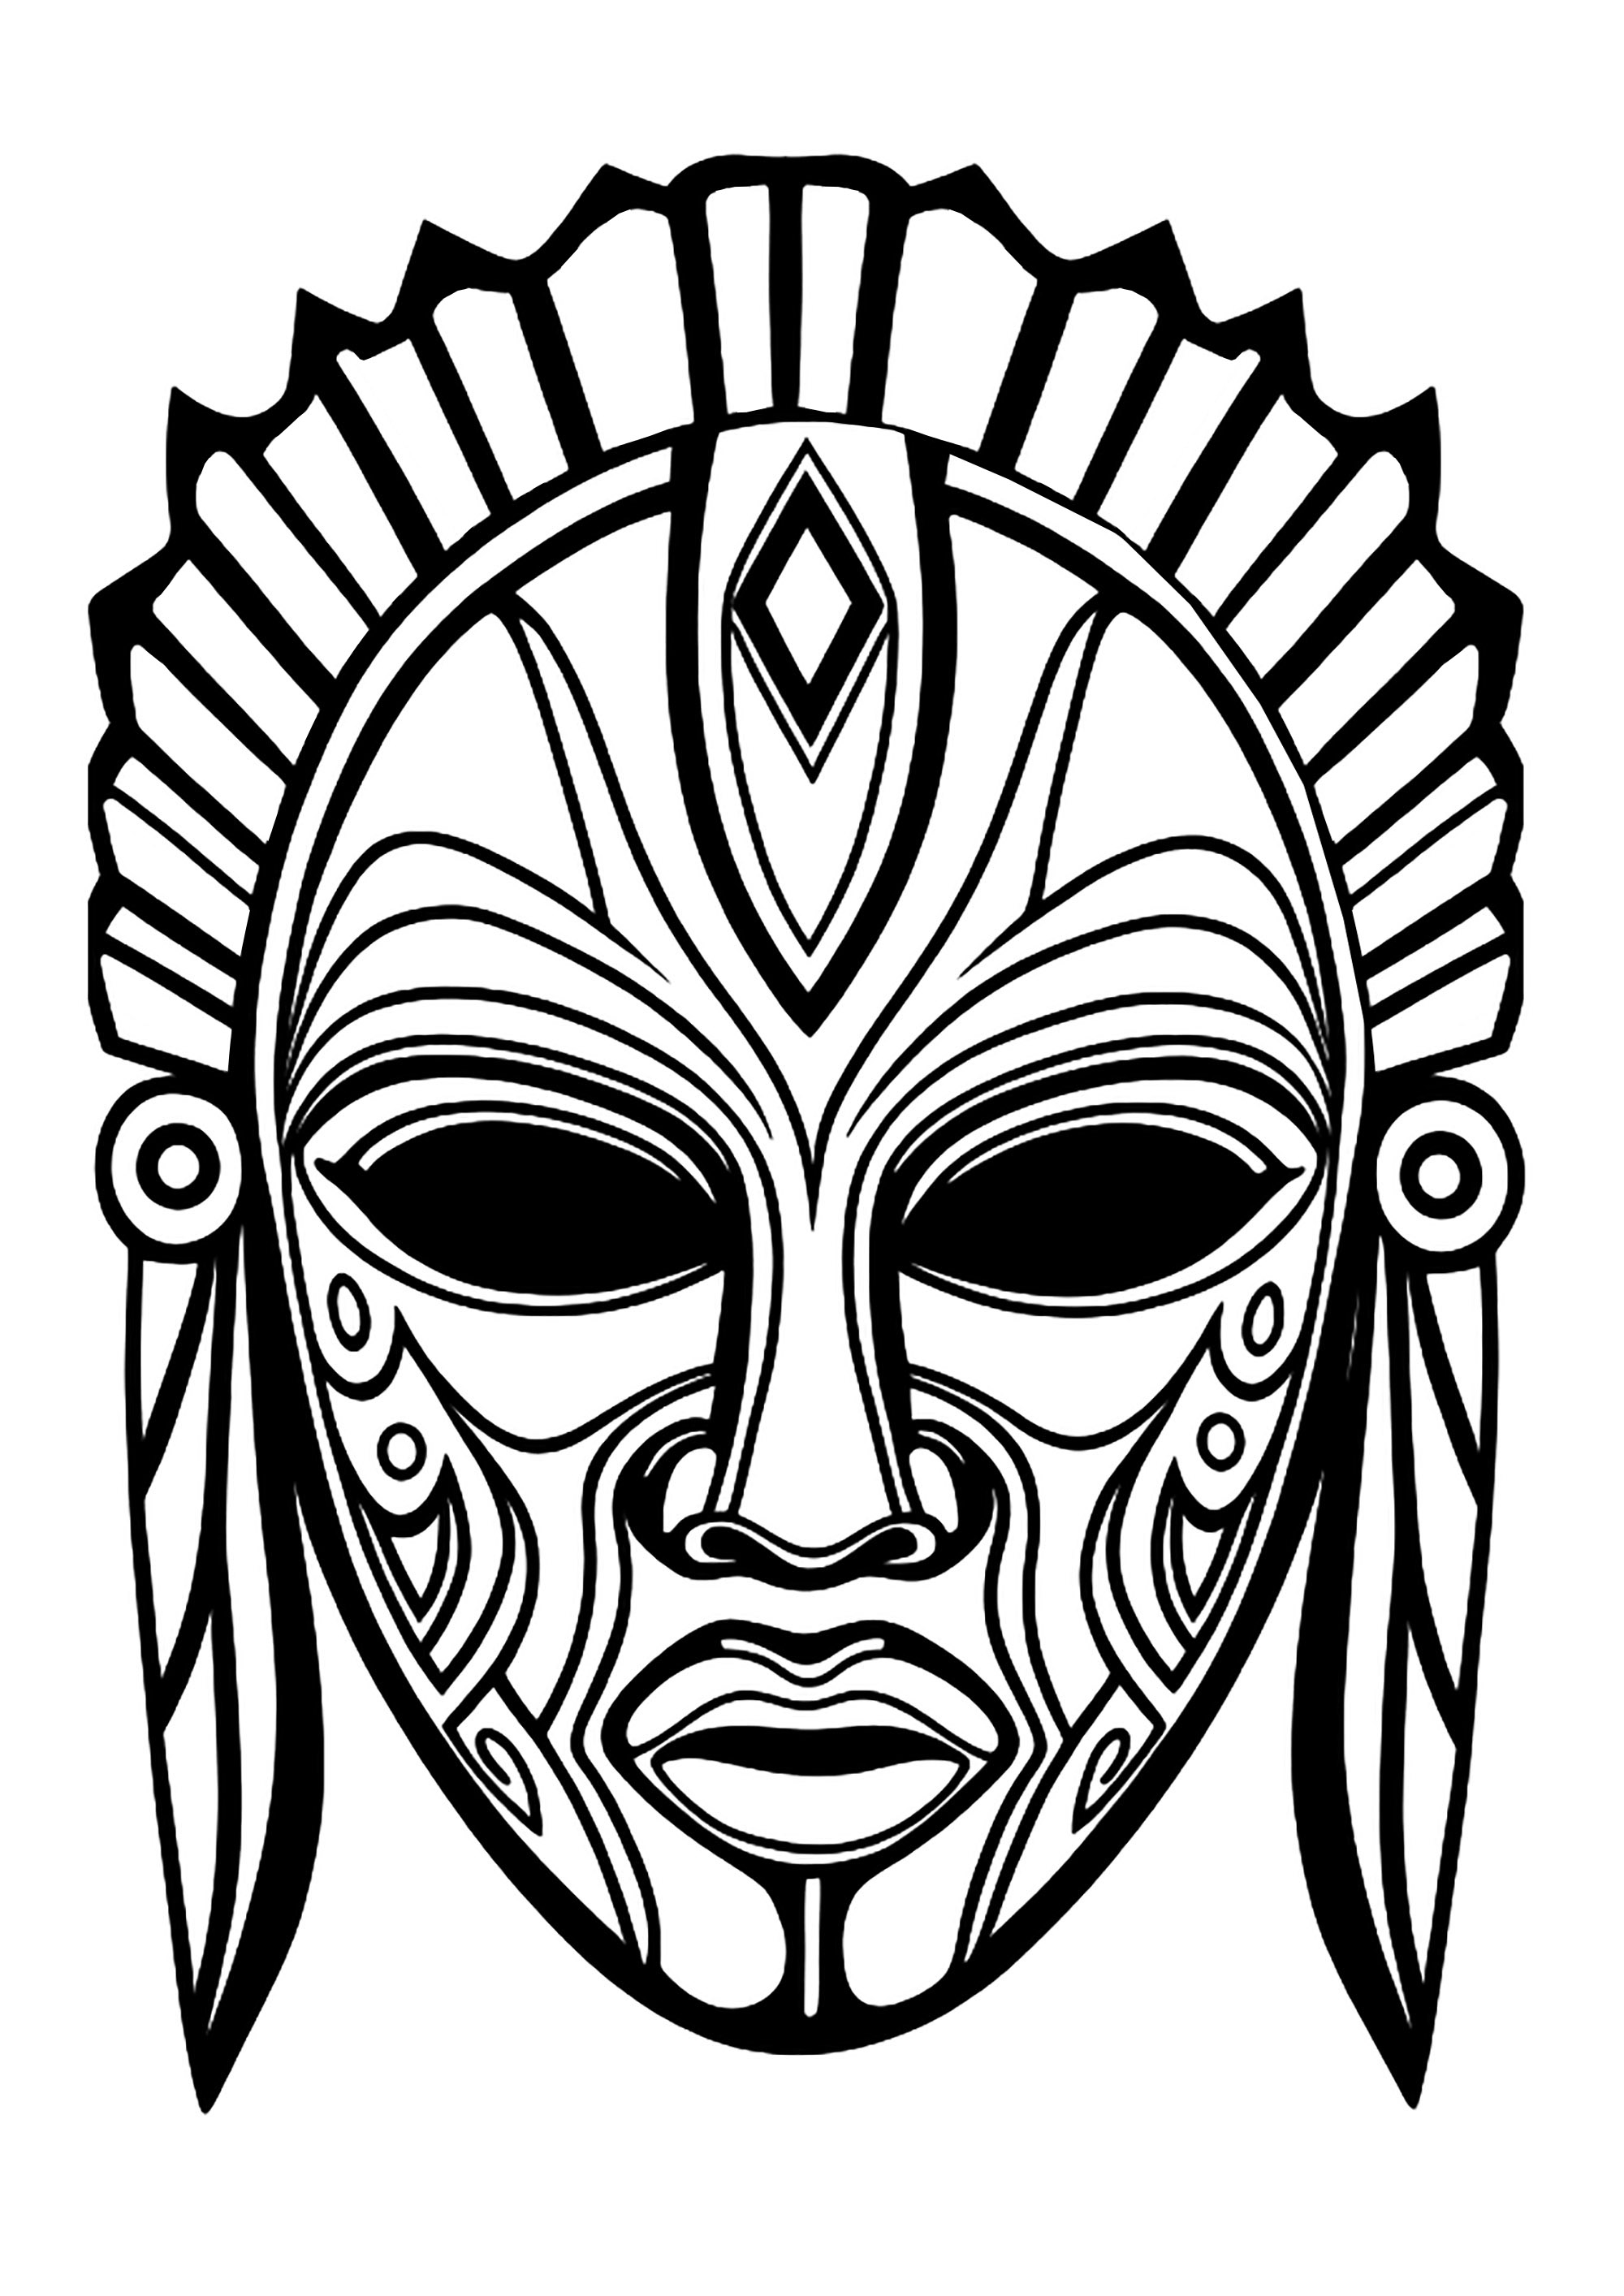 An imaginary mask inspired by African masks, to be colored with beautiful bright colors. This coloring page is an invitation to creativity and imagination. It is inspired by African masks and is composed of various shapes and decorative details that will give your child the opportunity to express his creativity and personality.